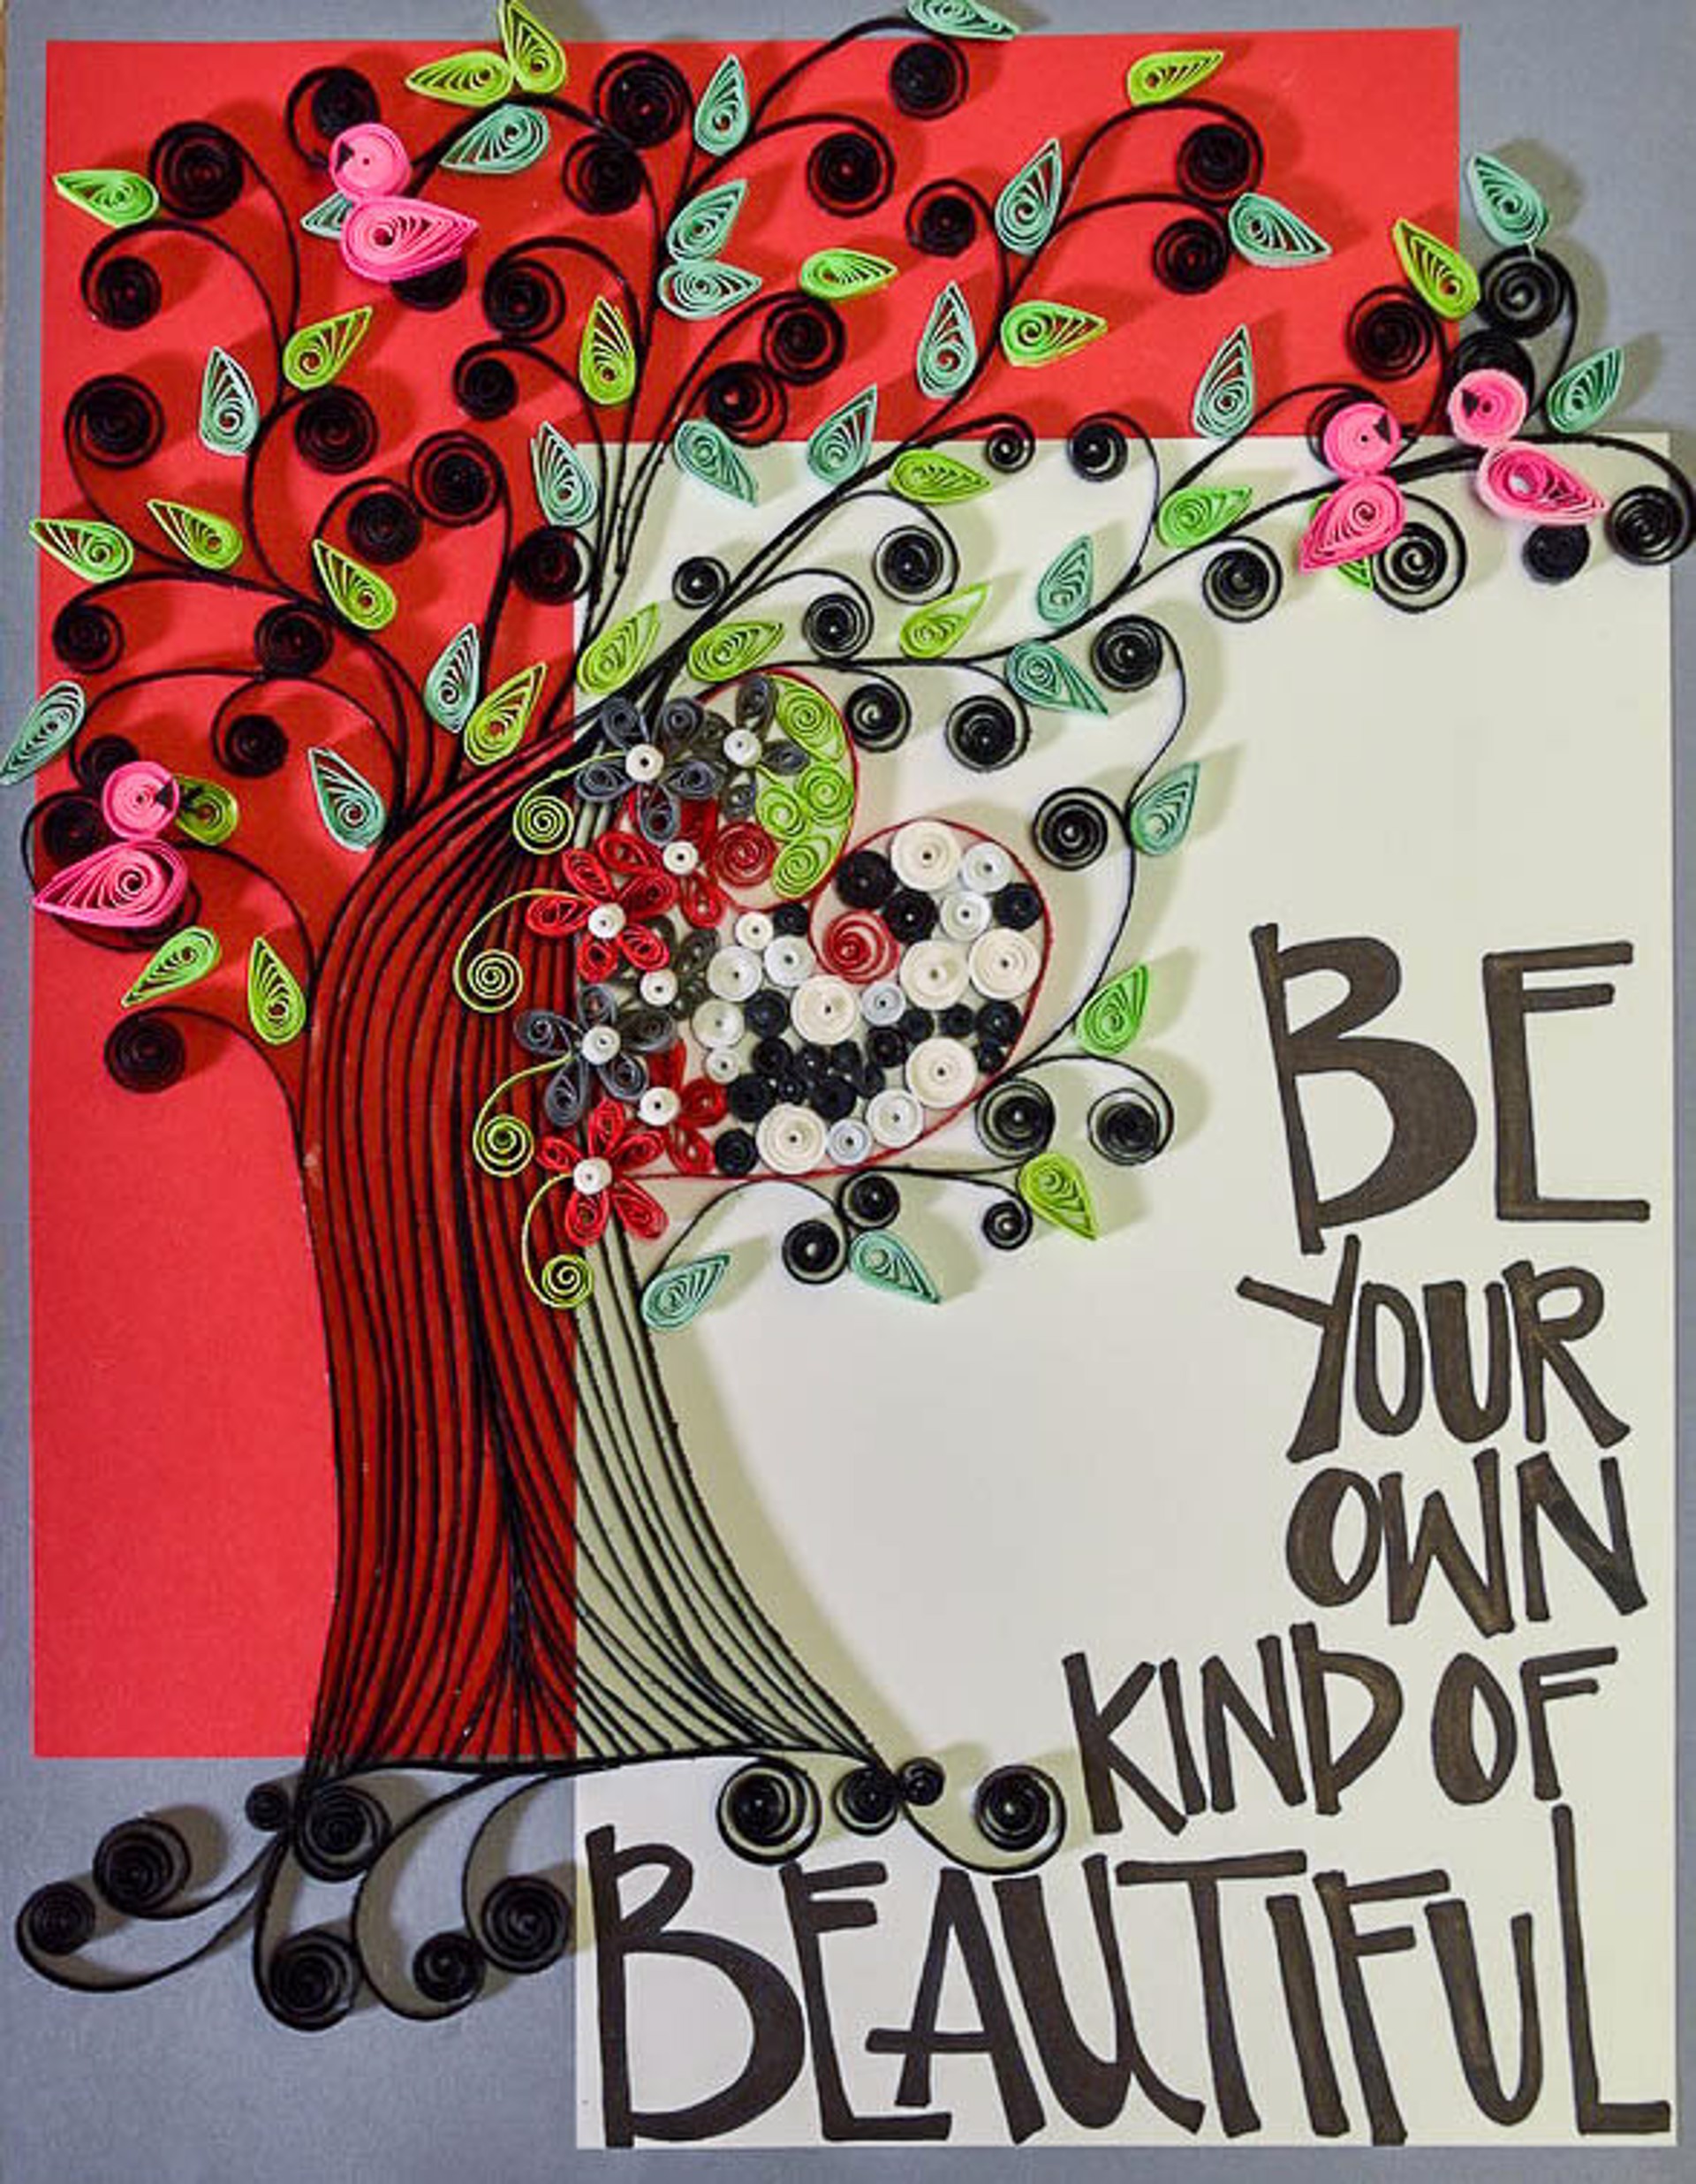 Be Your Own Kind of Beautiful by Sunshine